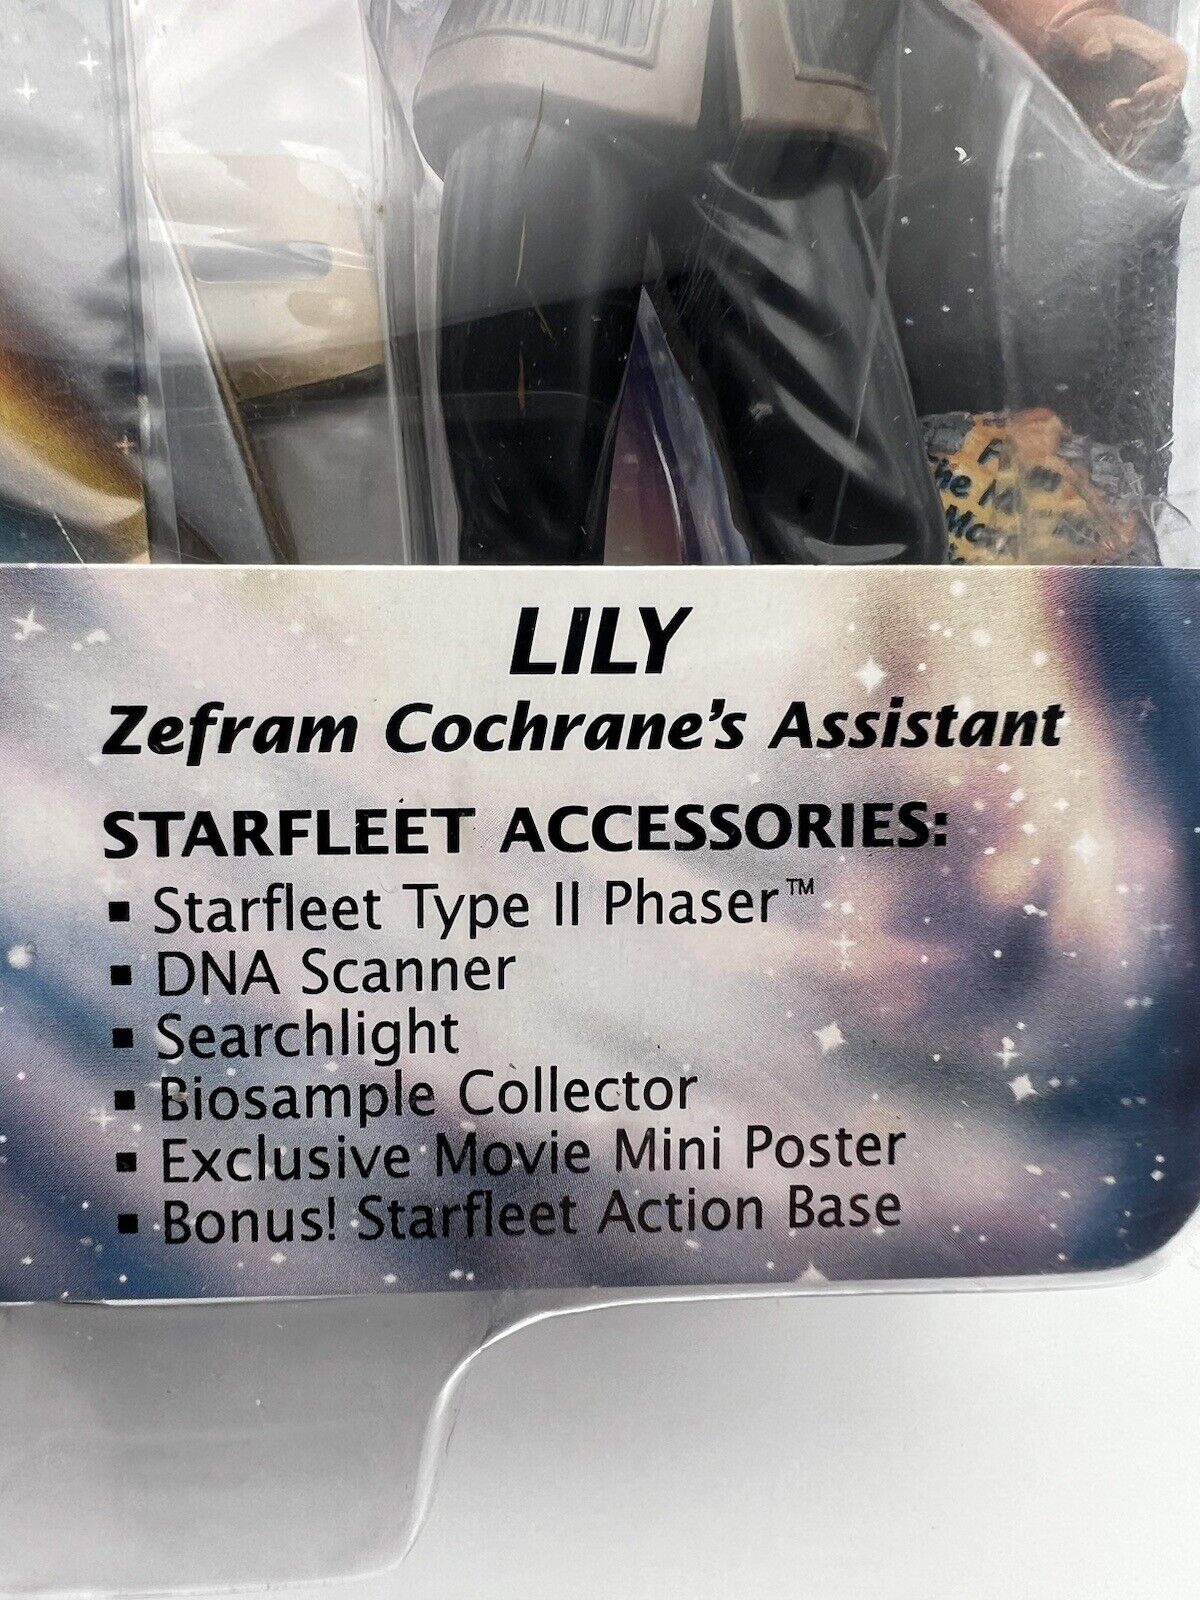 Star Trek First Contact Lily Action Figure Playmates 1996 NEW IN BOX Playmates Toys n/a - фотография #8